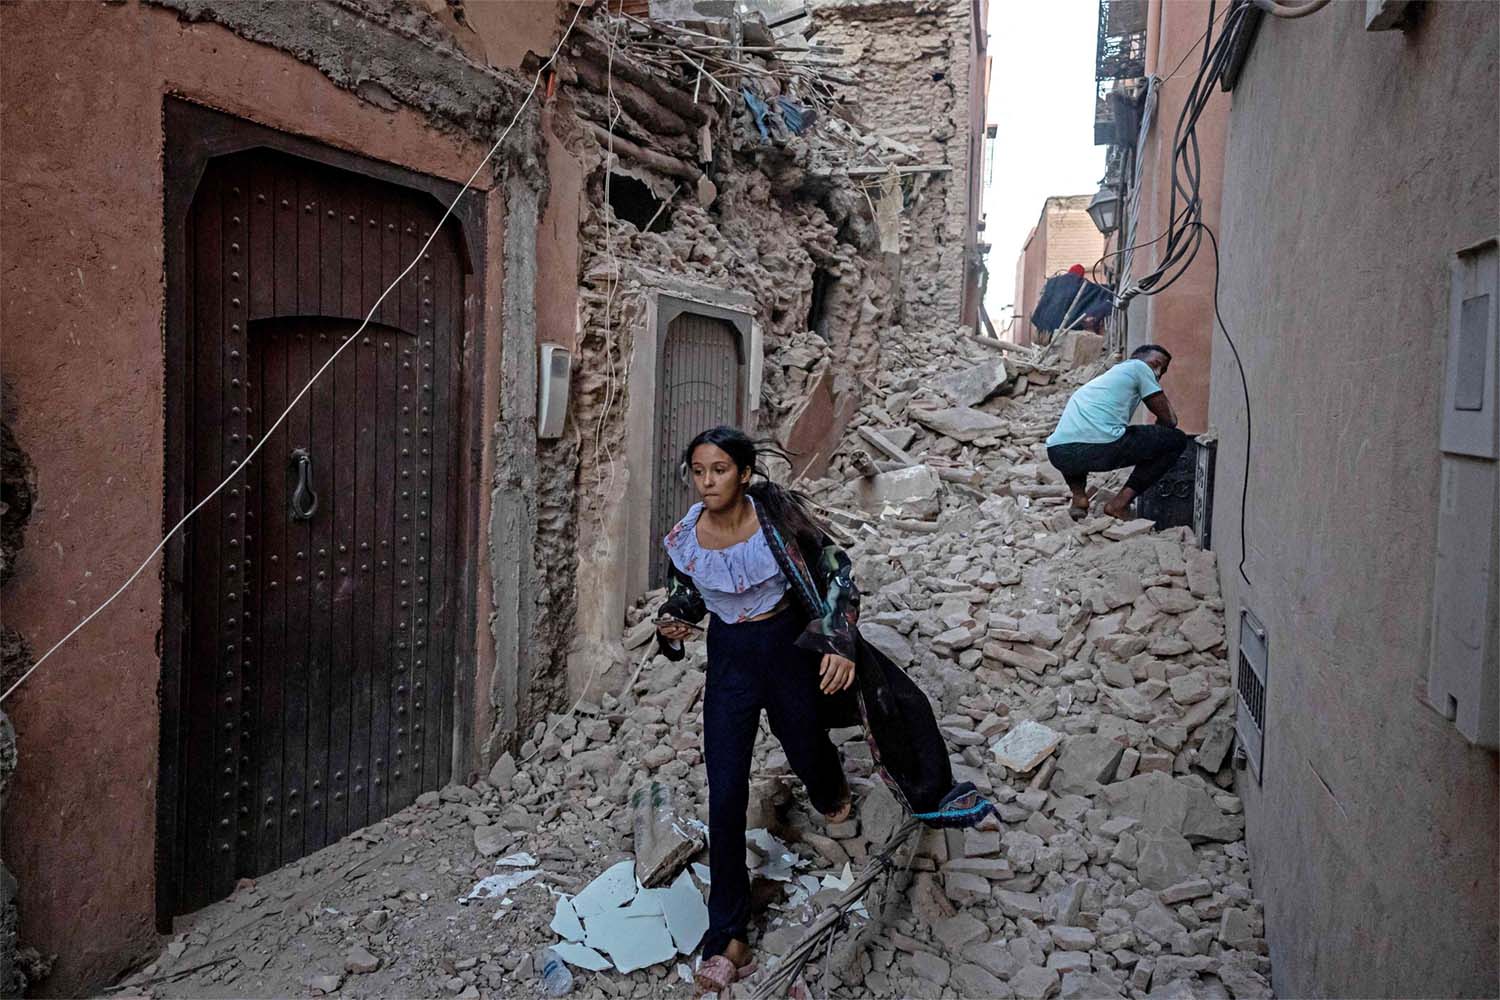 The rubble in the earthquake-damaged old city in Marrakesh